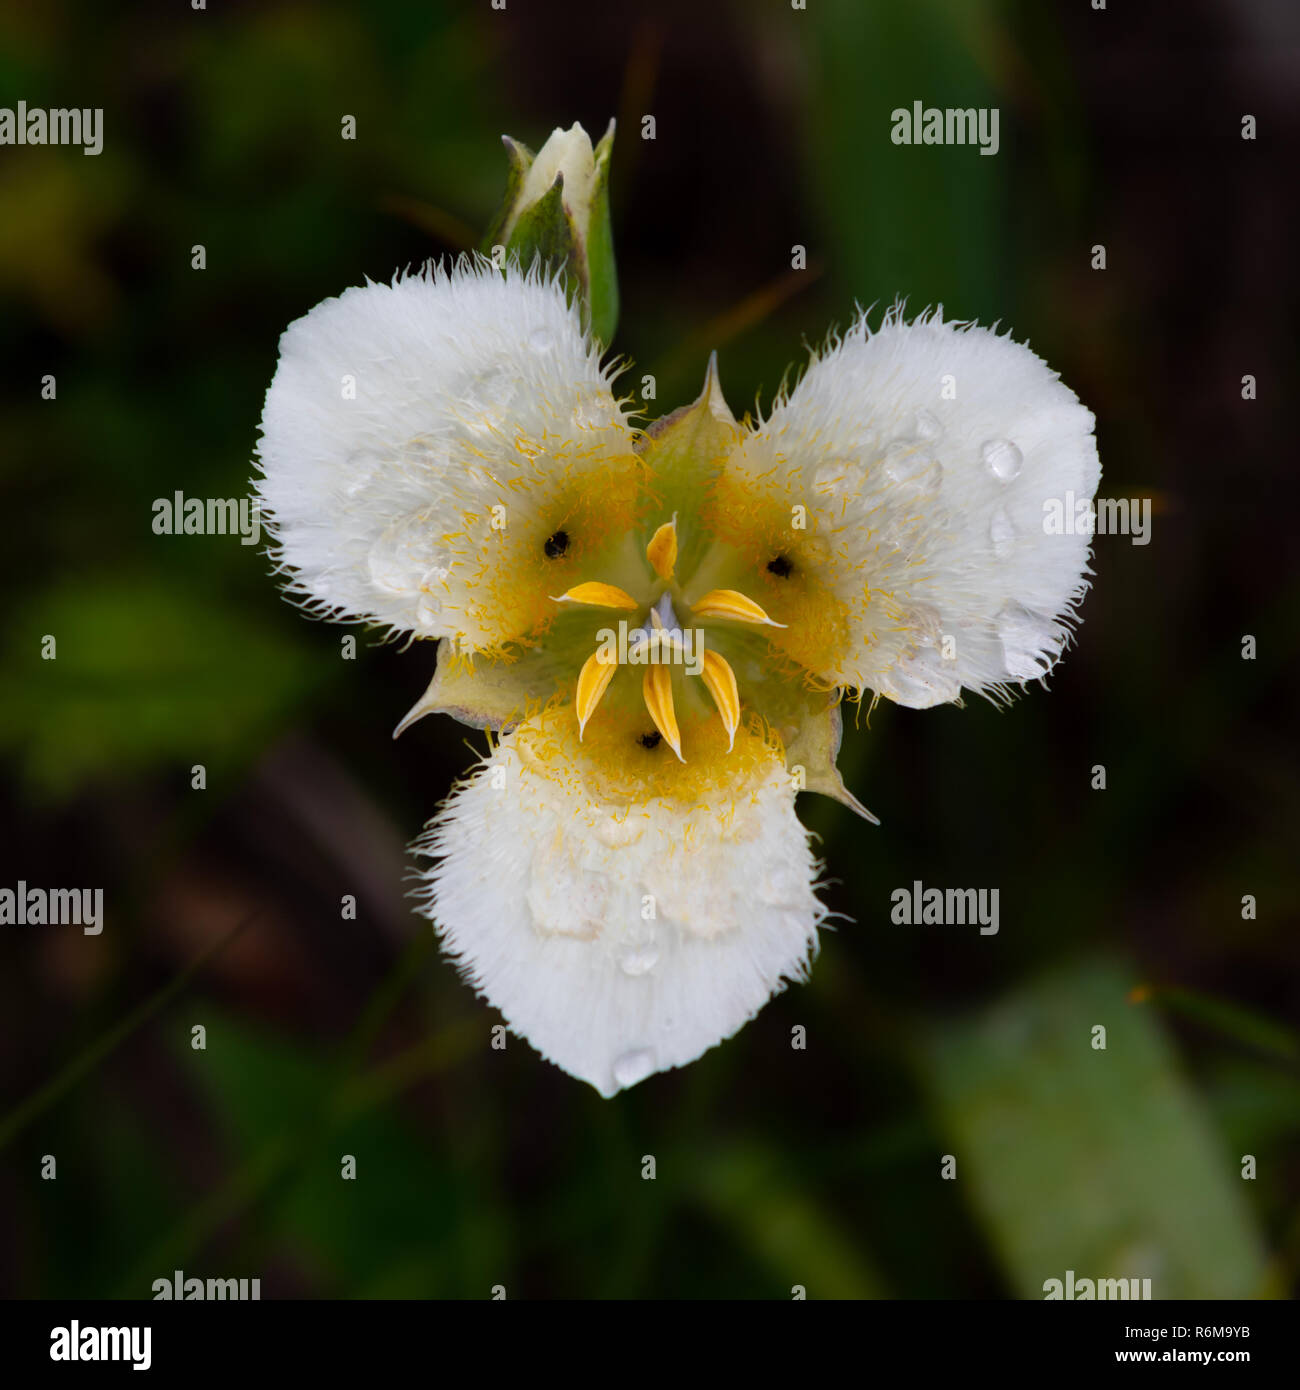 Rain Drops Cling to Pointed Mariposa Lily Stock Photo